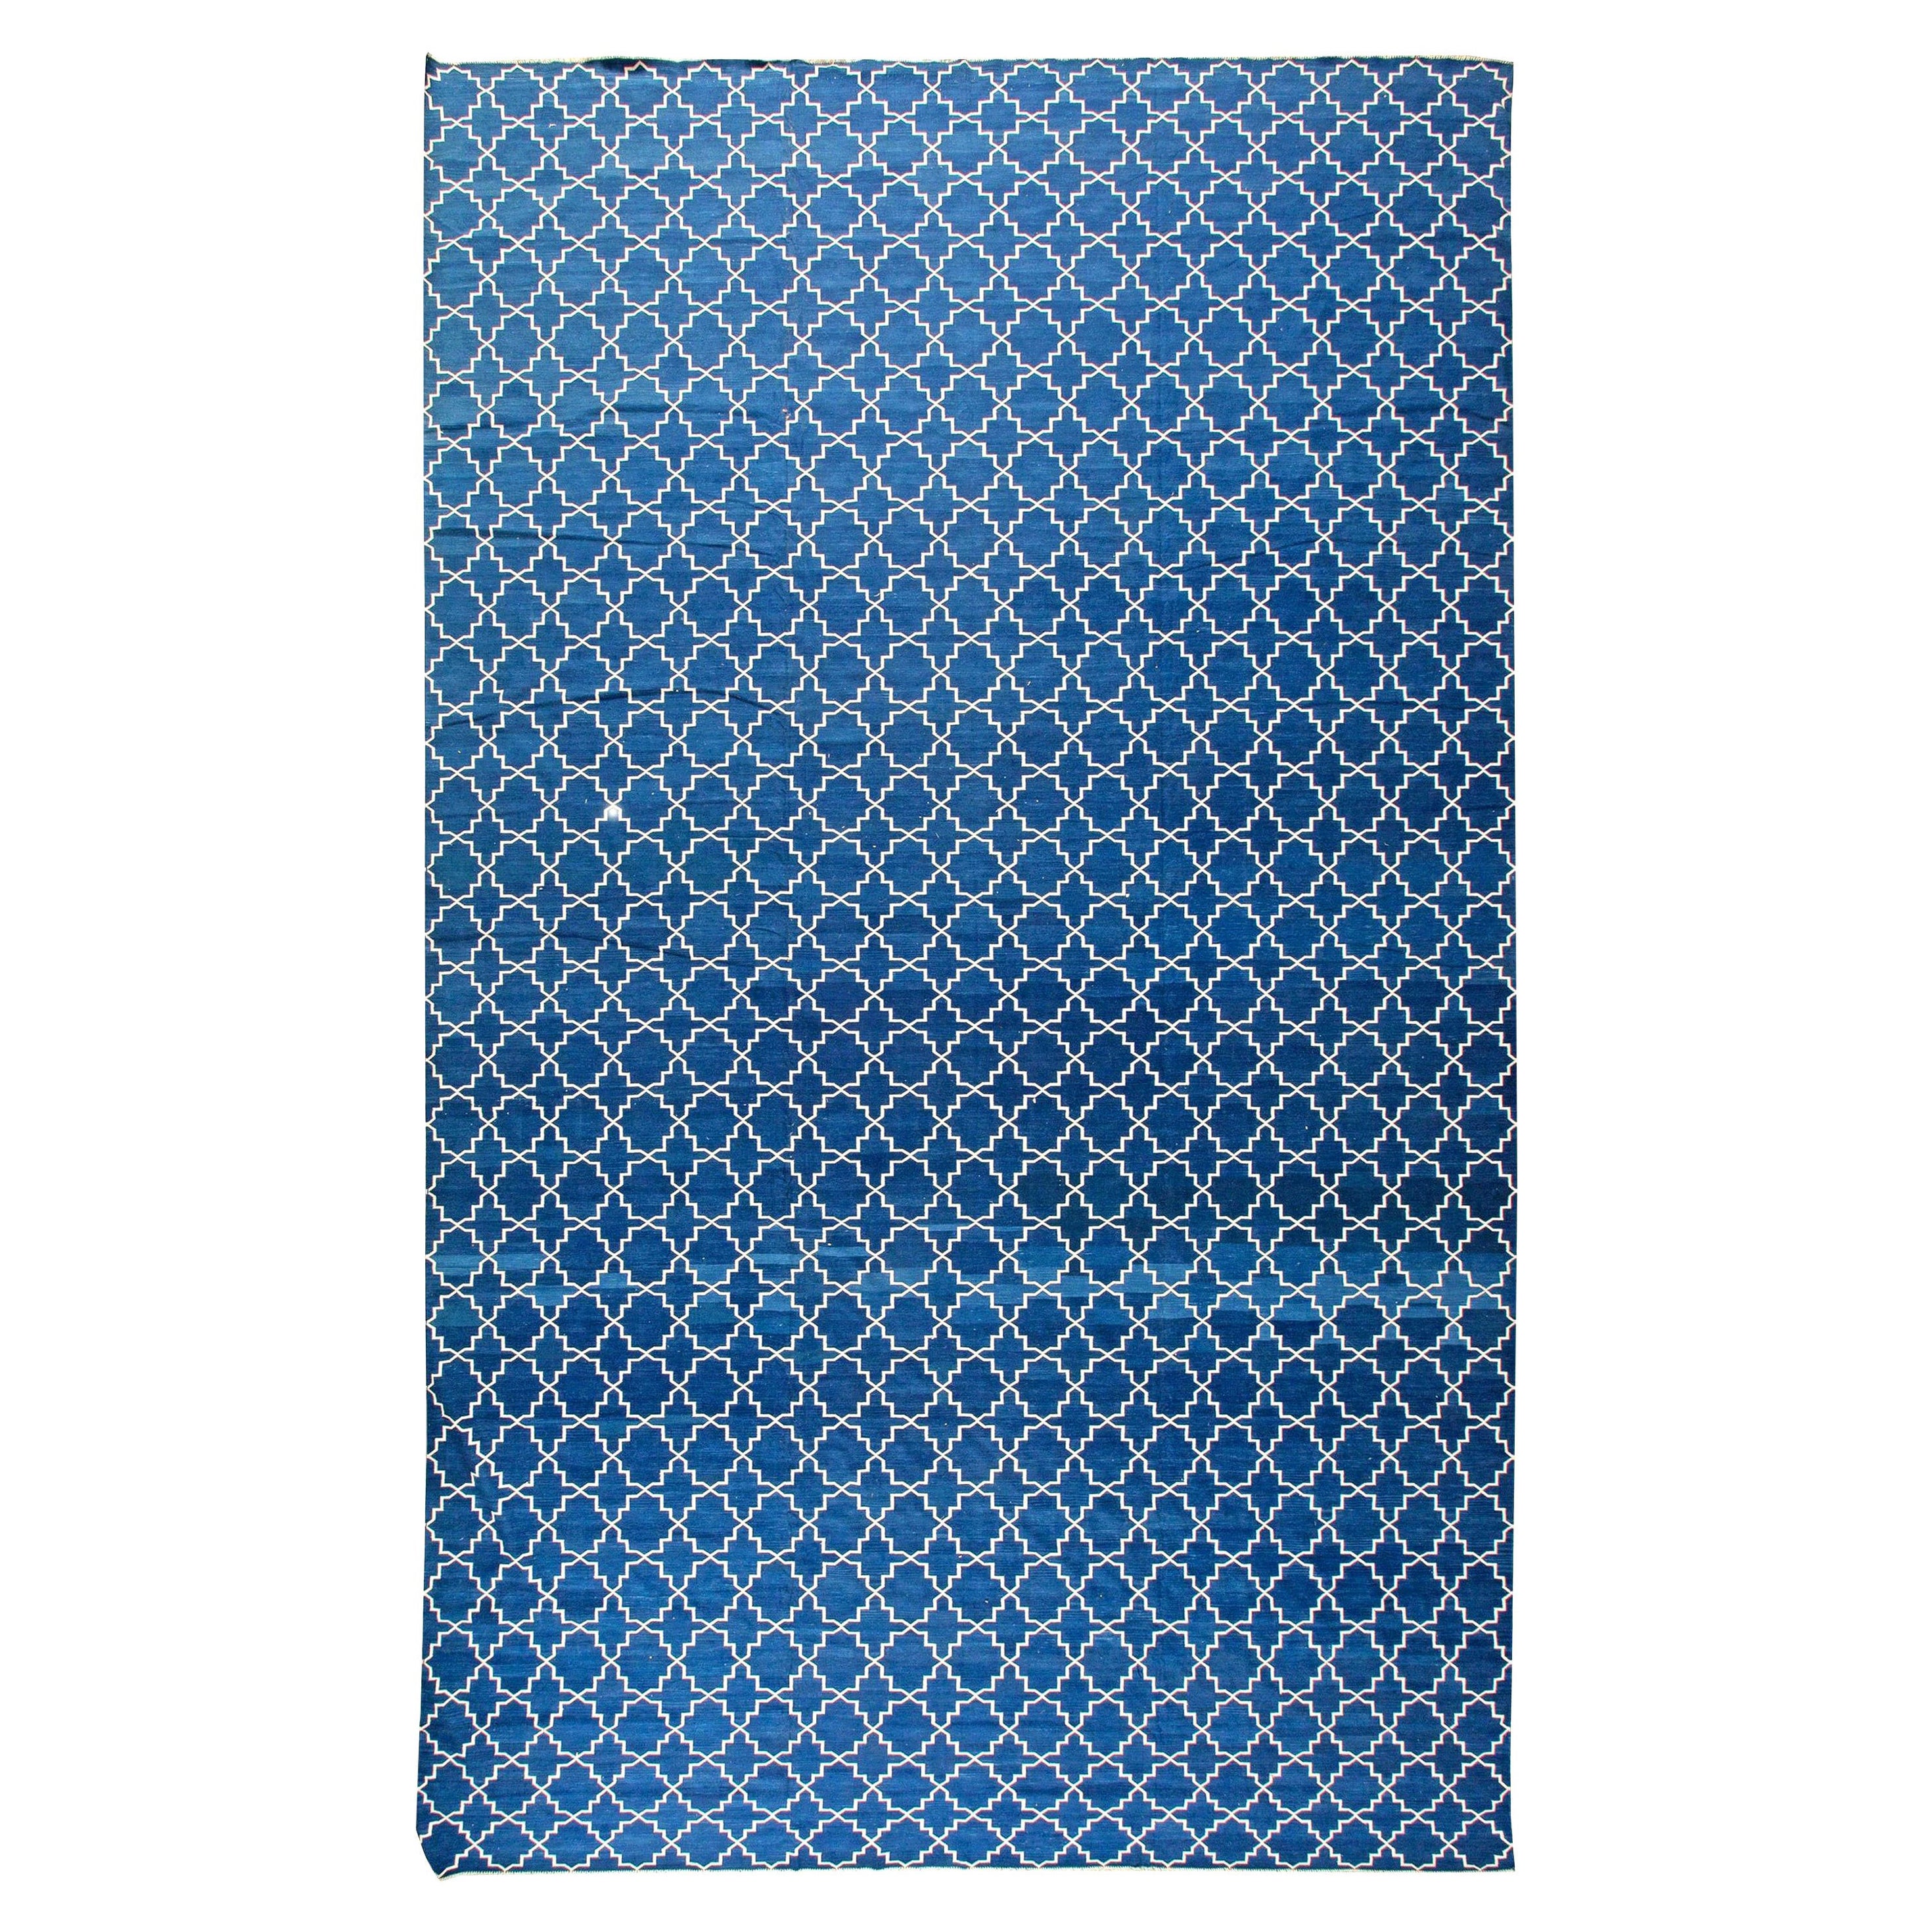 Contemporary Indian Dhurrie Blue and White Handmade Rug by Doris Leslie Blau